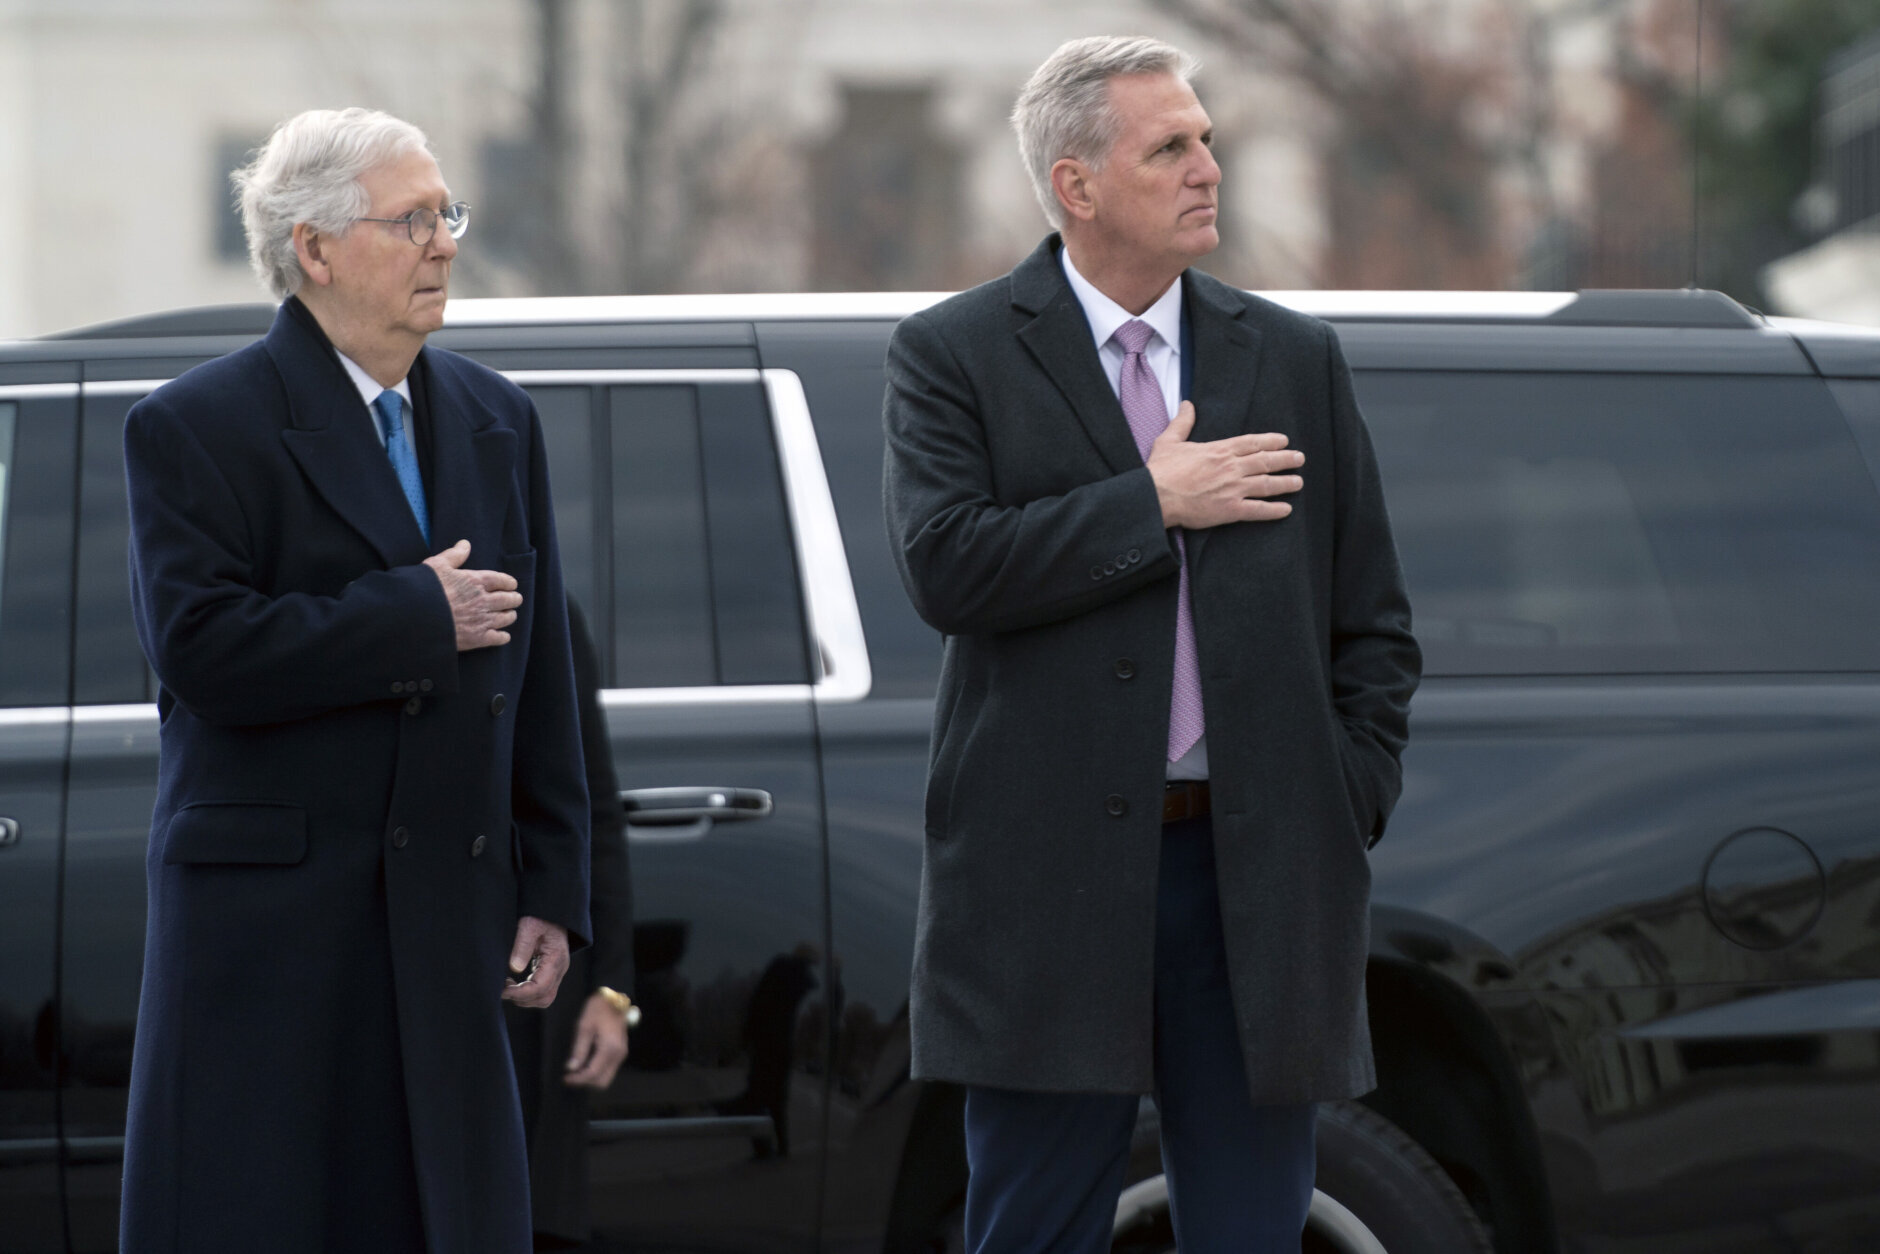 Senate Minority Leader Mitch McConnell of Ky., and House Minority Leader Kevin McCarthy of Calif., watch as a military honor guard carries the flag-draped casket of former Sen. Bob Dole from the U.S. Capitol in Washington, Friday, Dec. 10, 2021, where he had lied in state on Thursday and over night.  (Greg Nash/Pool via AP)